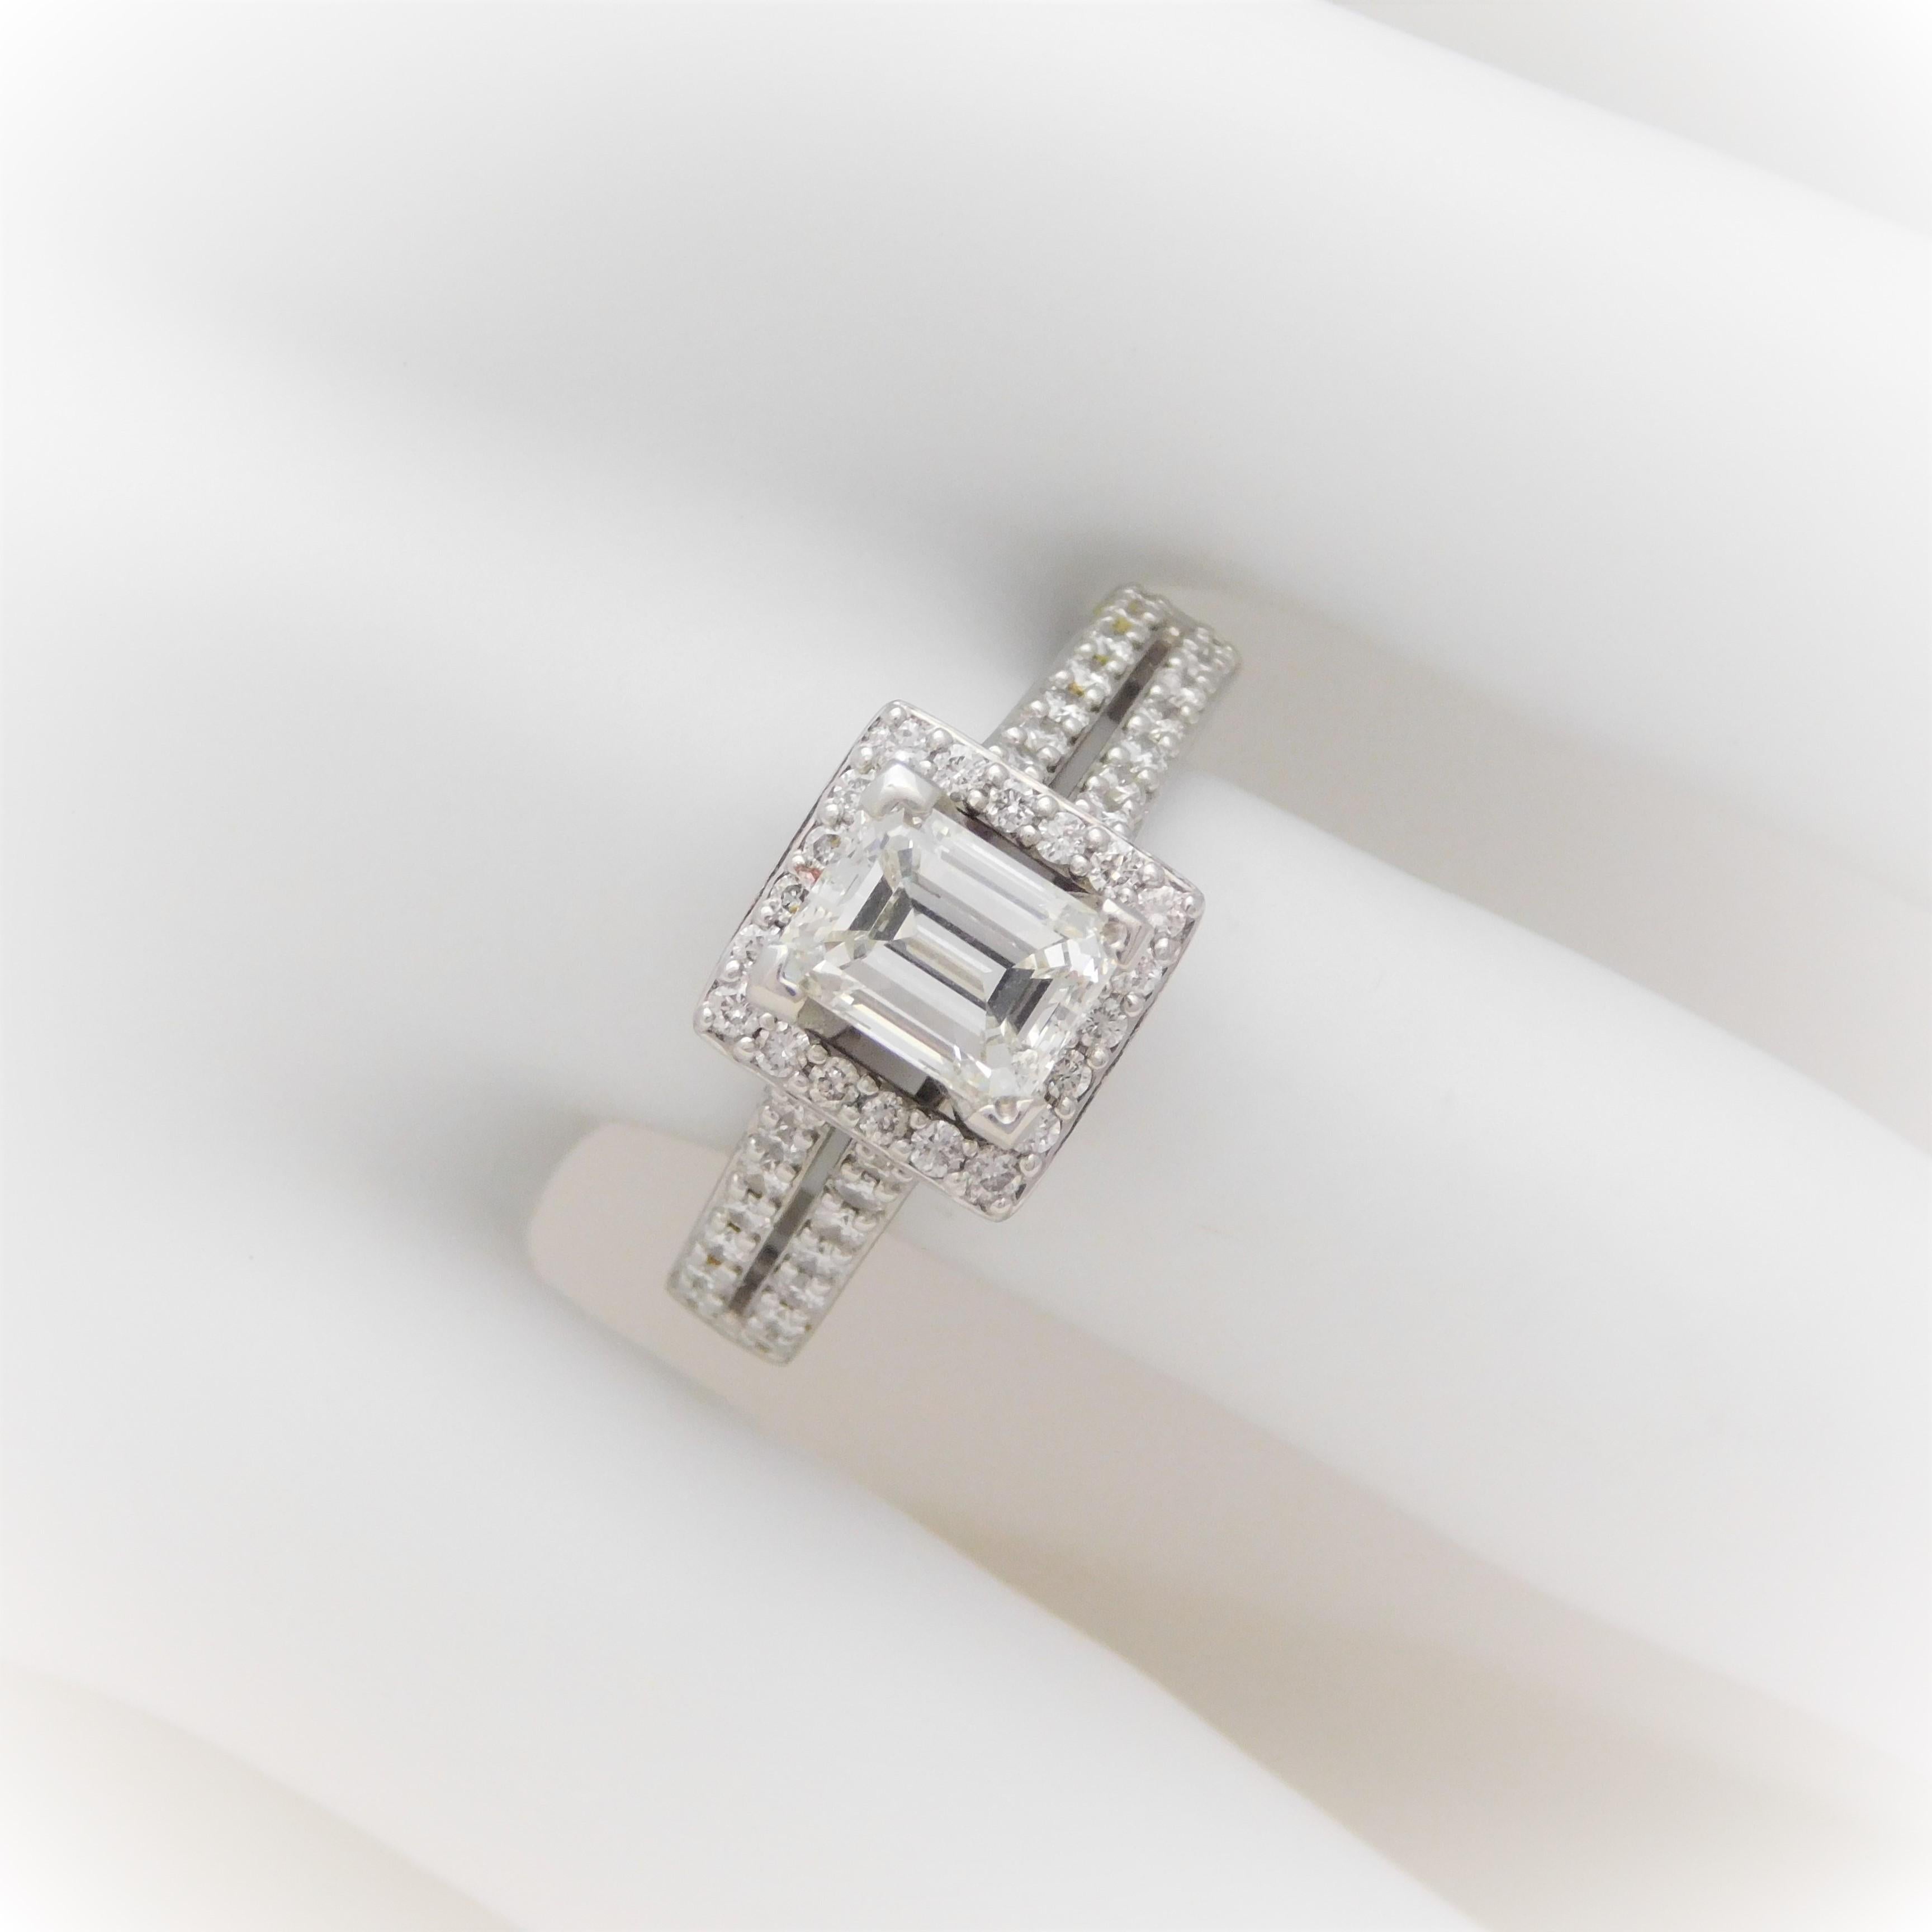 This stunning halo-style engagement ring has been crafted in solid 14k white gold.  It has been masterfully set, in a four-prong diamond halo setting, with a pristine 1.30ct emerald-cut natural diamond.  This high quality near colorless center